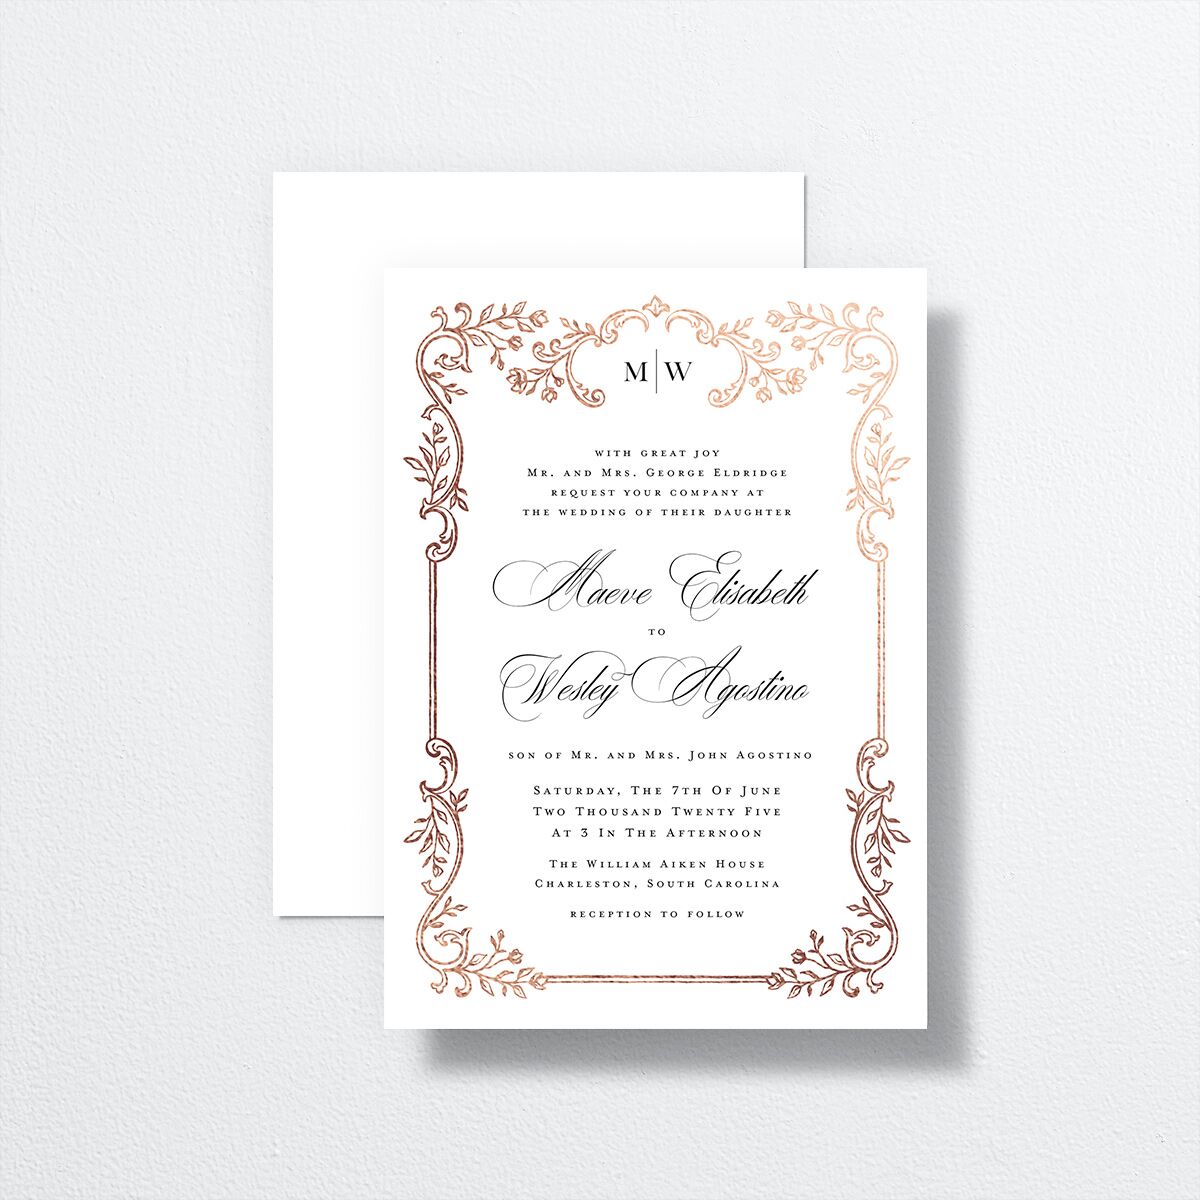 Opulences Wedding Invitations by Vera Wang front-and-back in white